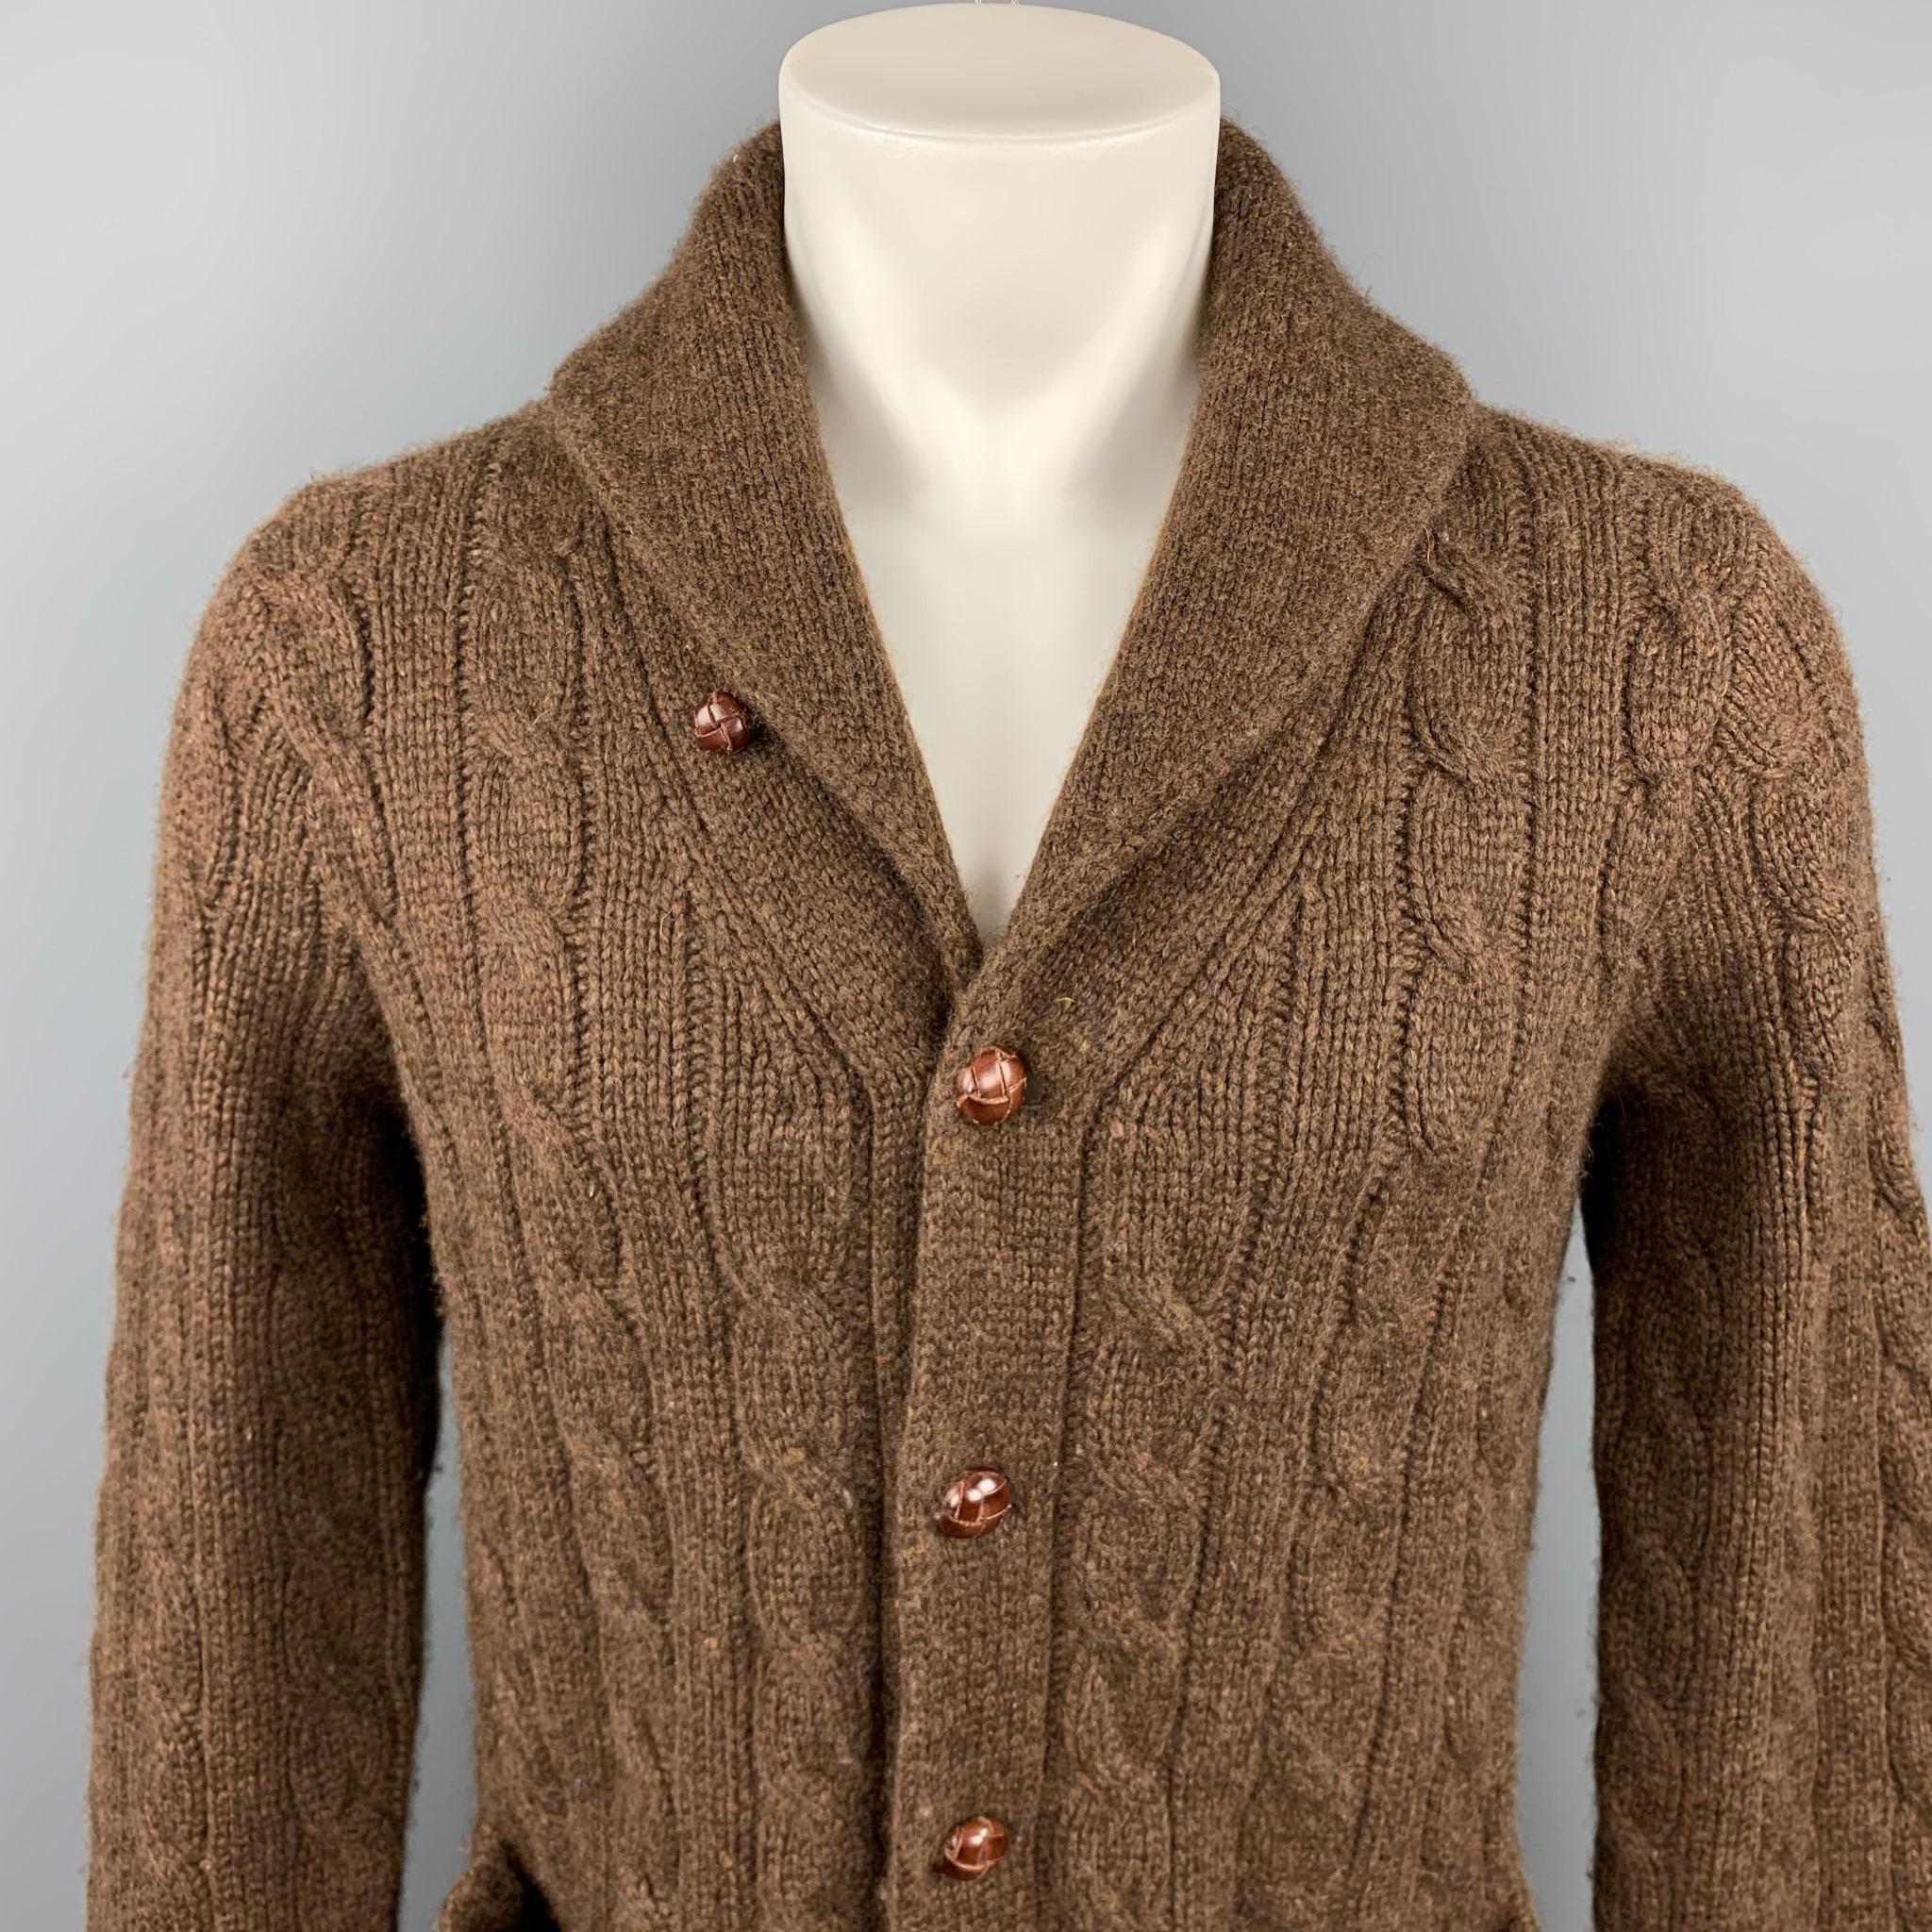 POLO by RALPH LAUREN cardigan comes in a brown cable knit cashmere featuring a shawl collar, front pockets, and a buttoned closure.

Excellent Pre-Owned Condition.
Marked: M

Measurements:

Shoulder: 17 in. 
Chest: 40 in. 
Sleeve: 29 in. 
Length: 27